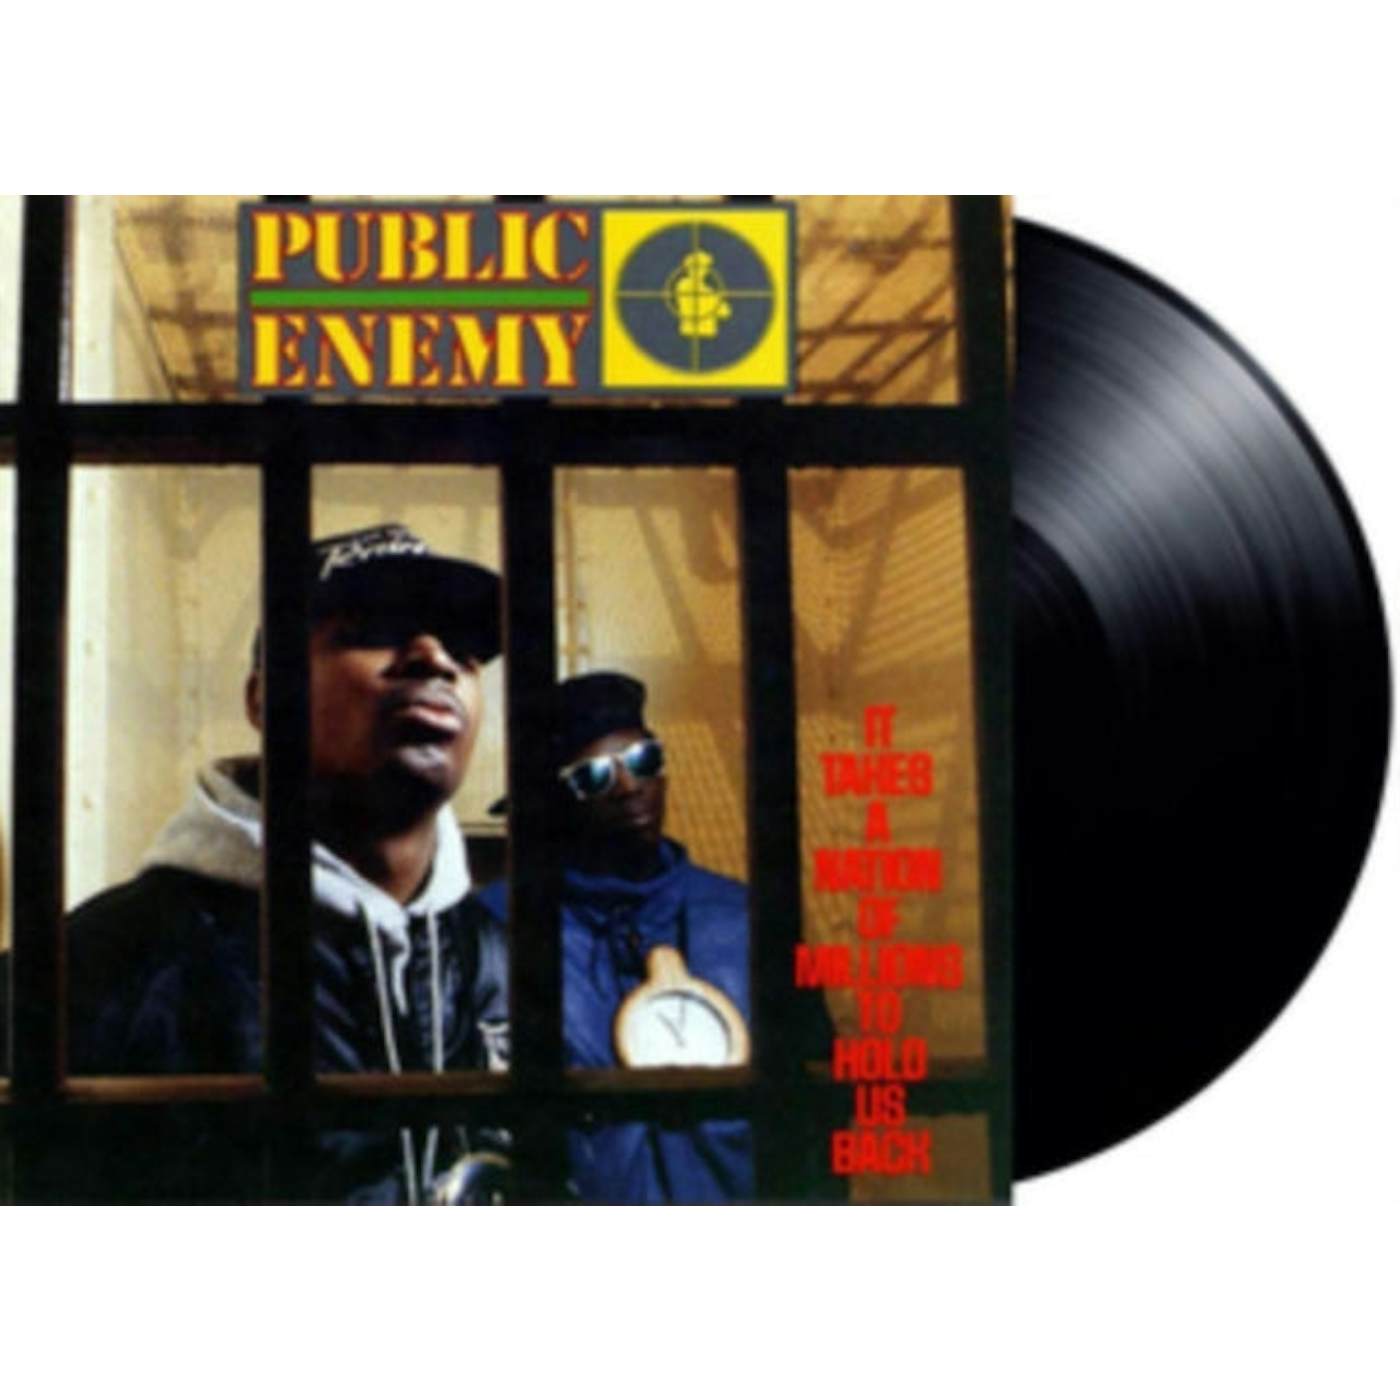 Public Enemy LP - It Takes A Nation Of Millions To Hold Us (Vinyl)